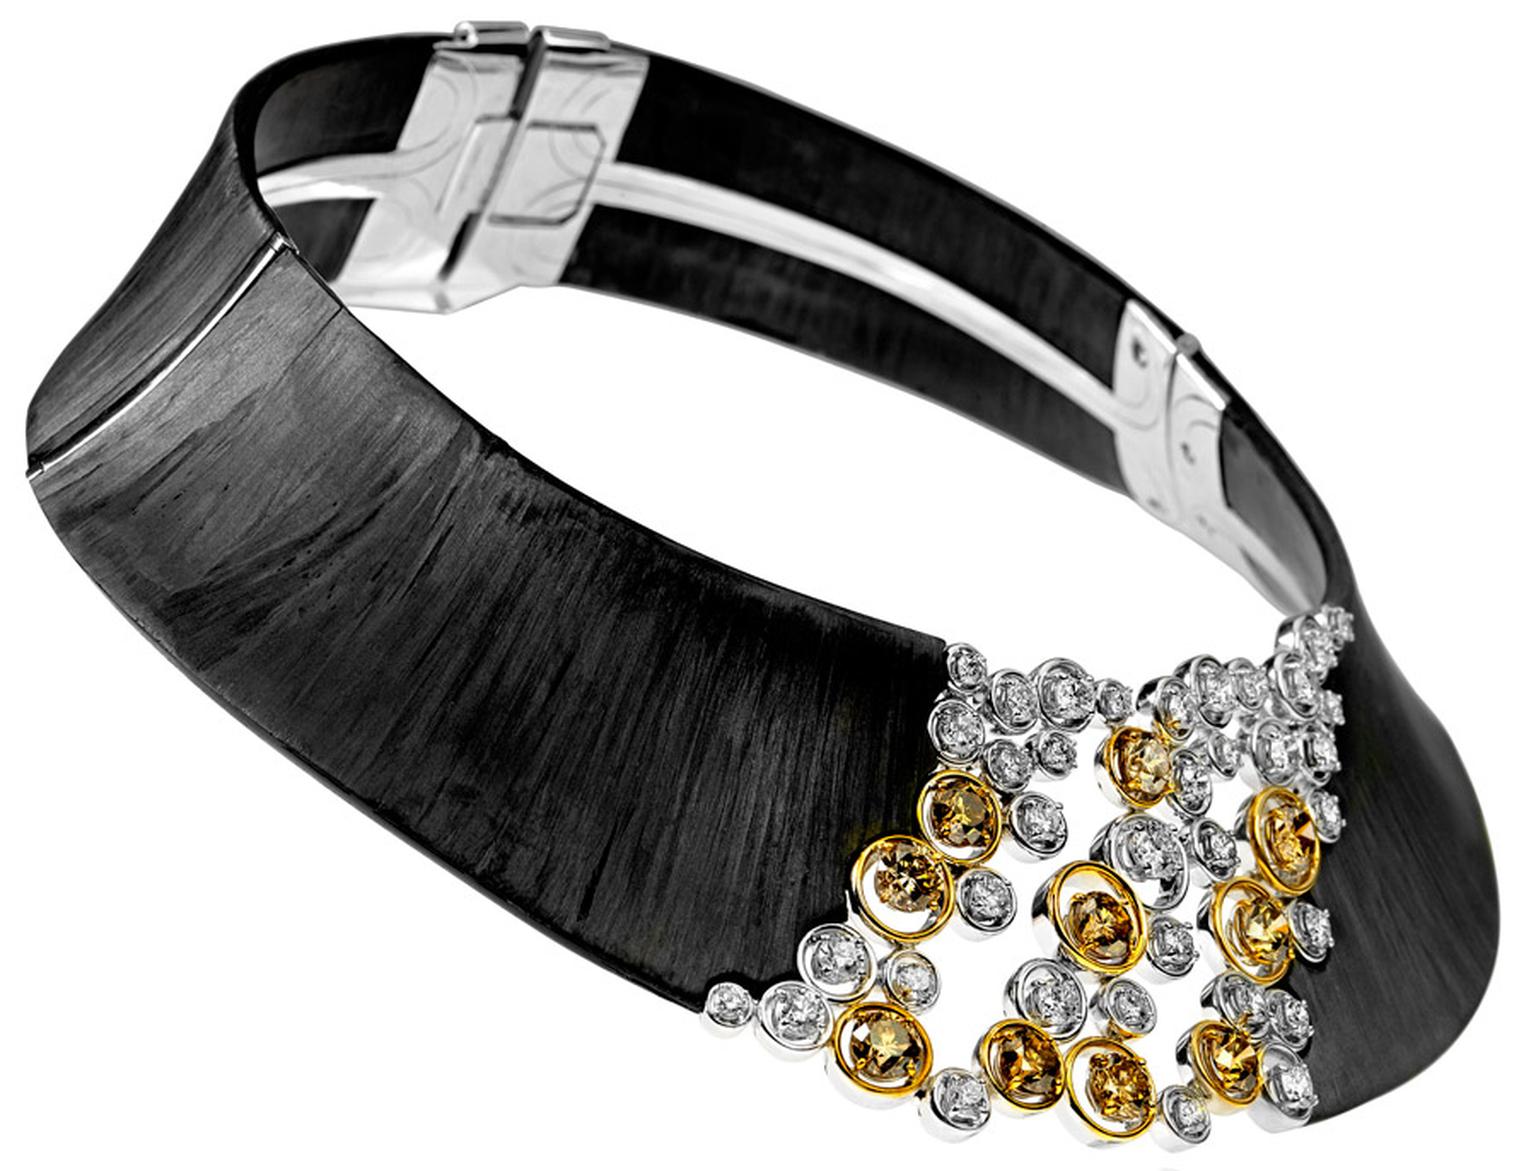 Adler-Necklace-in-carbon-in-white-and-yellow-gold-set-with-brown-diamonds-and-diamonds.jpg